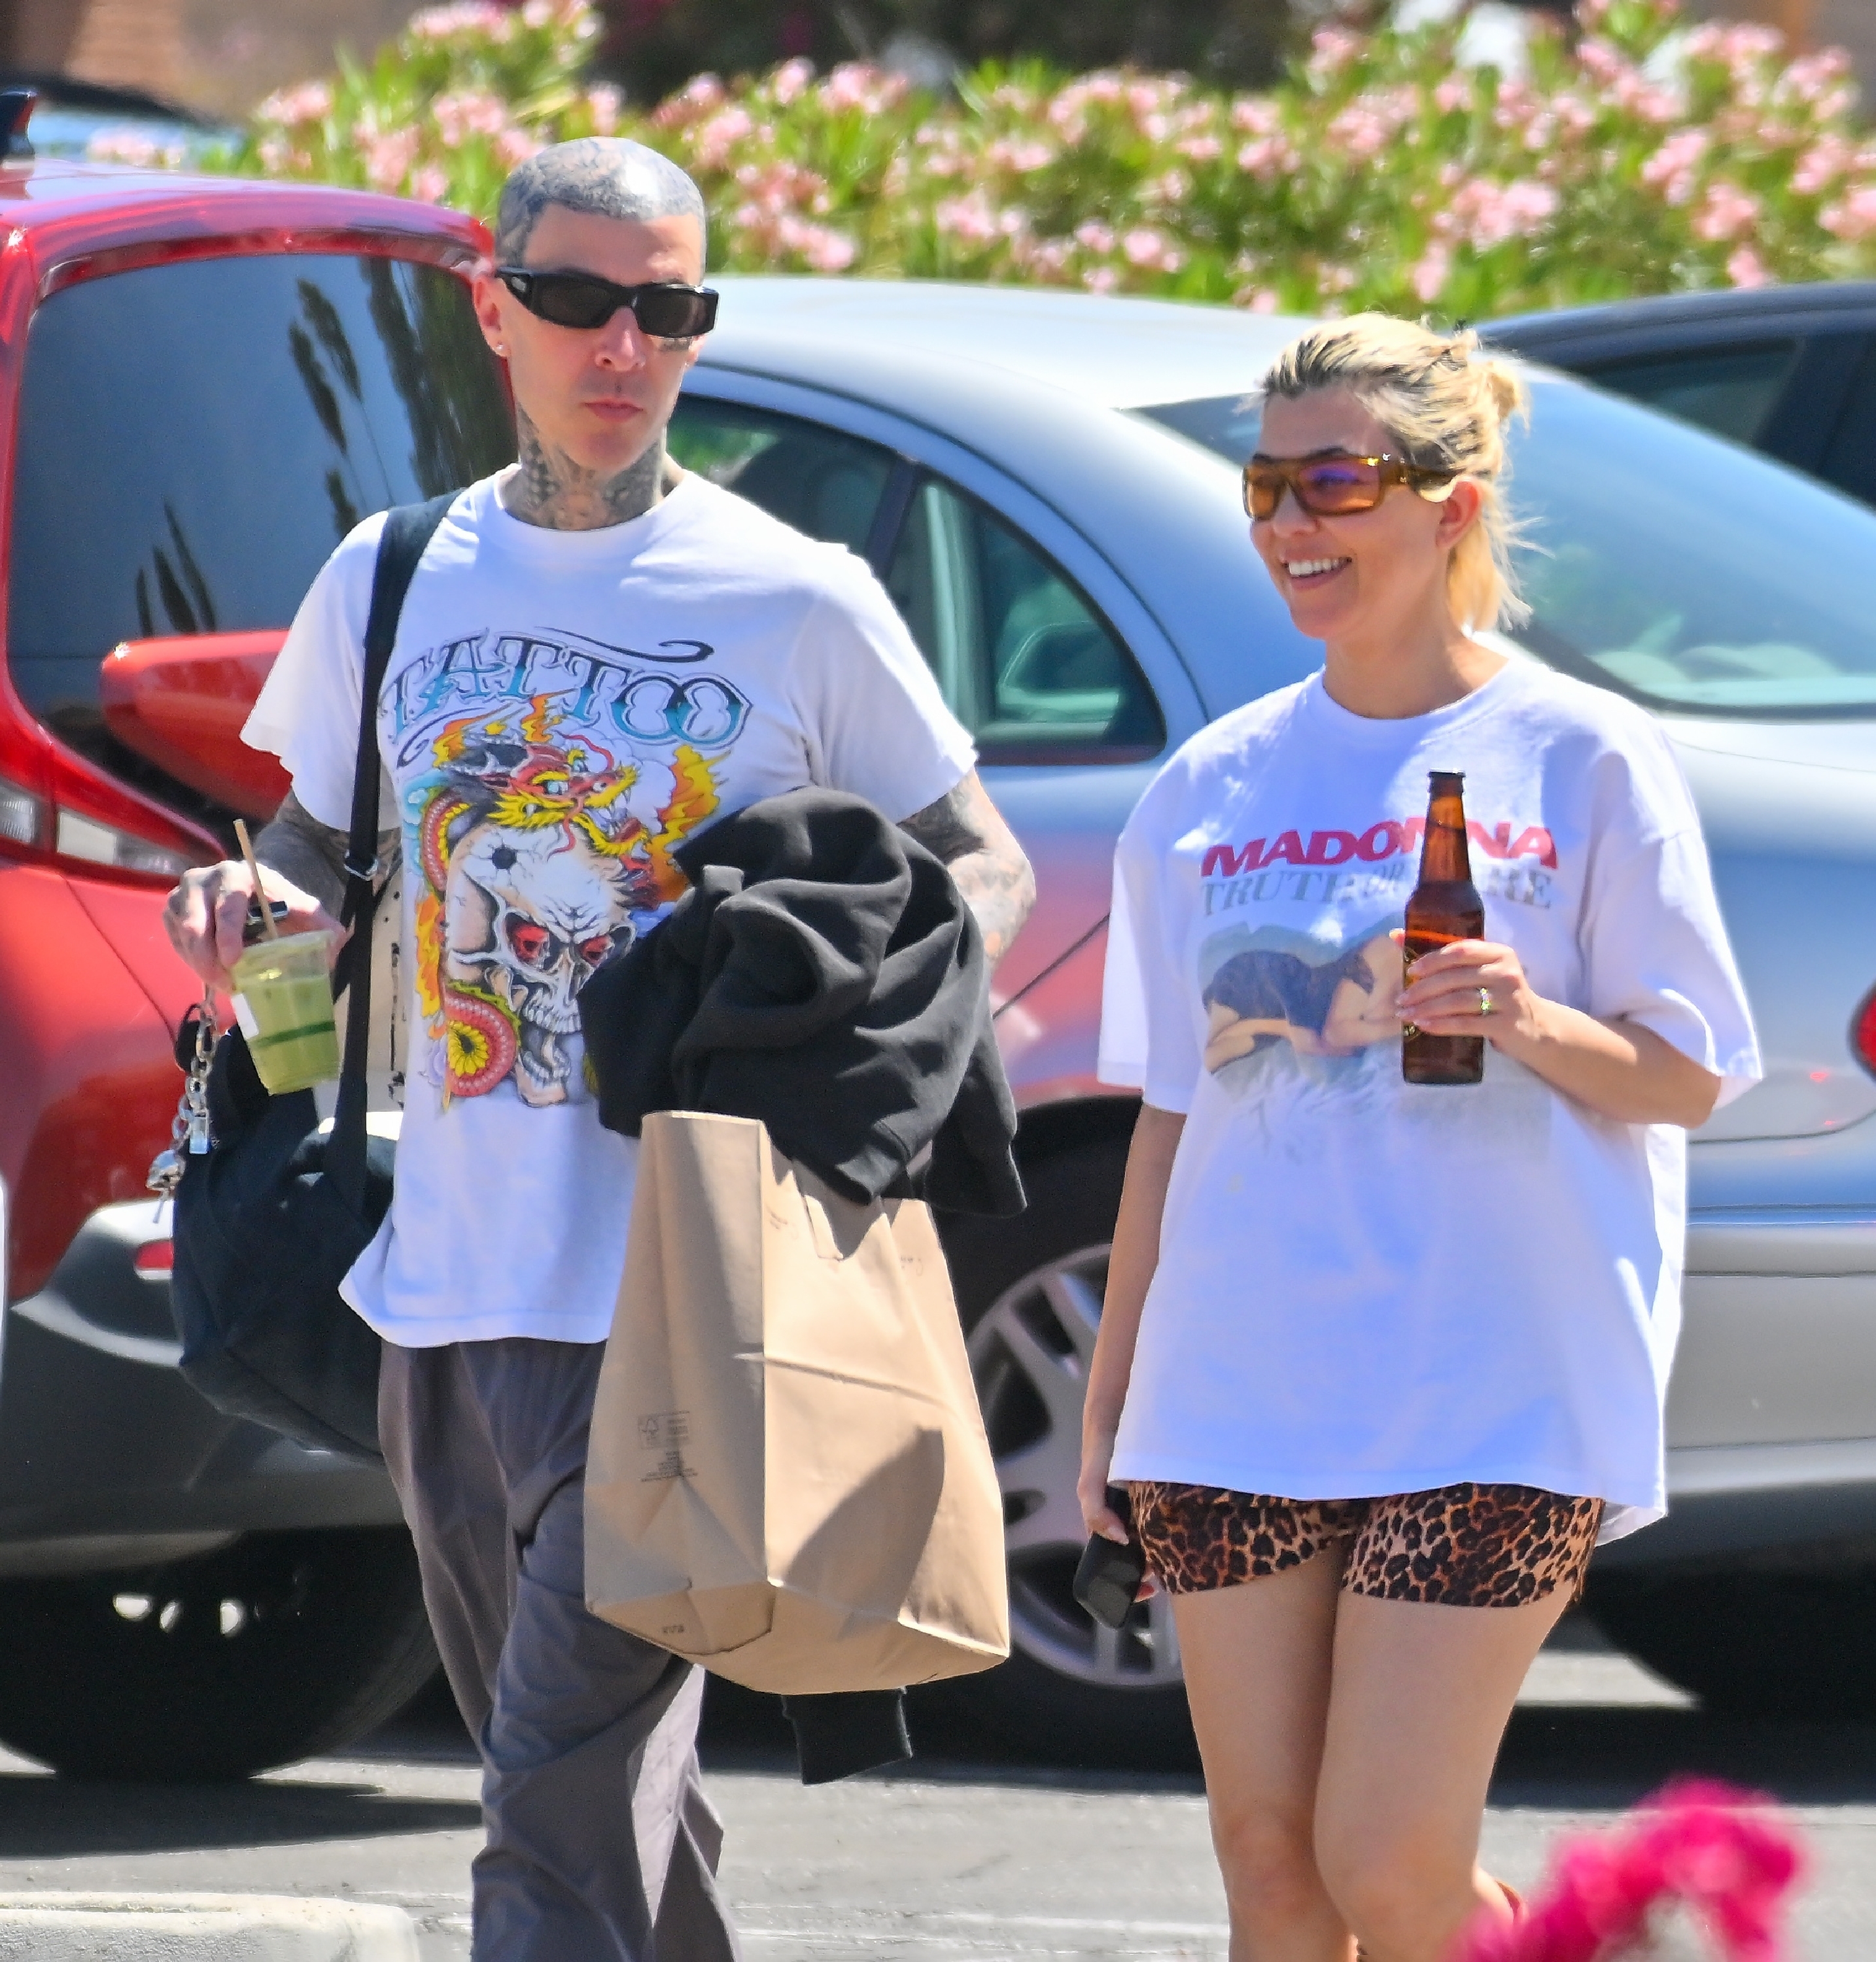 Close-up of Travis and Kourtney wearing T-shirts and walking together outside